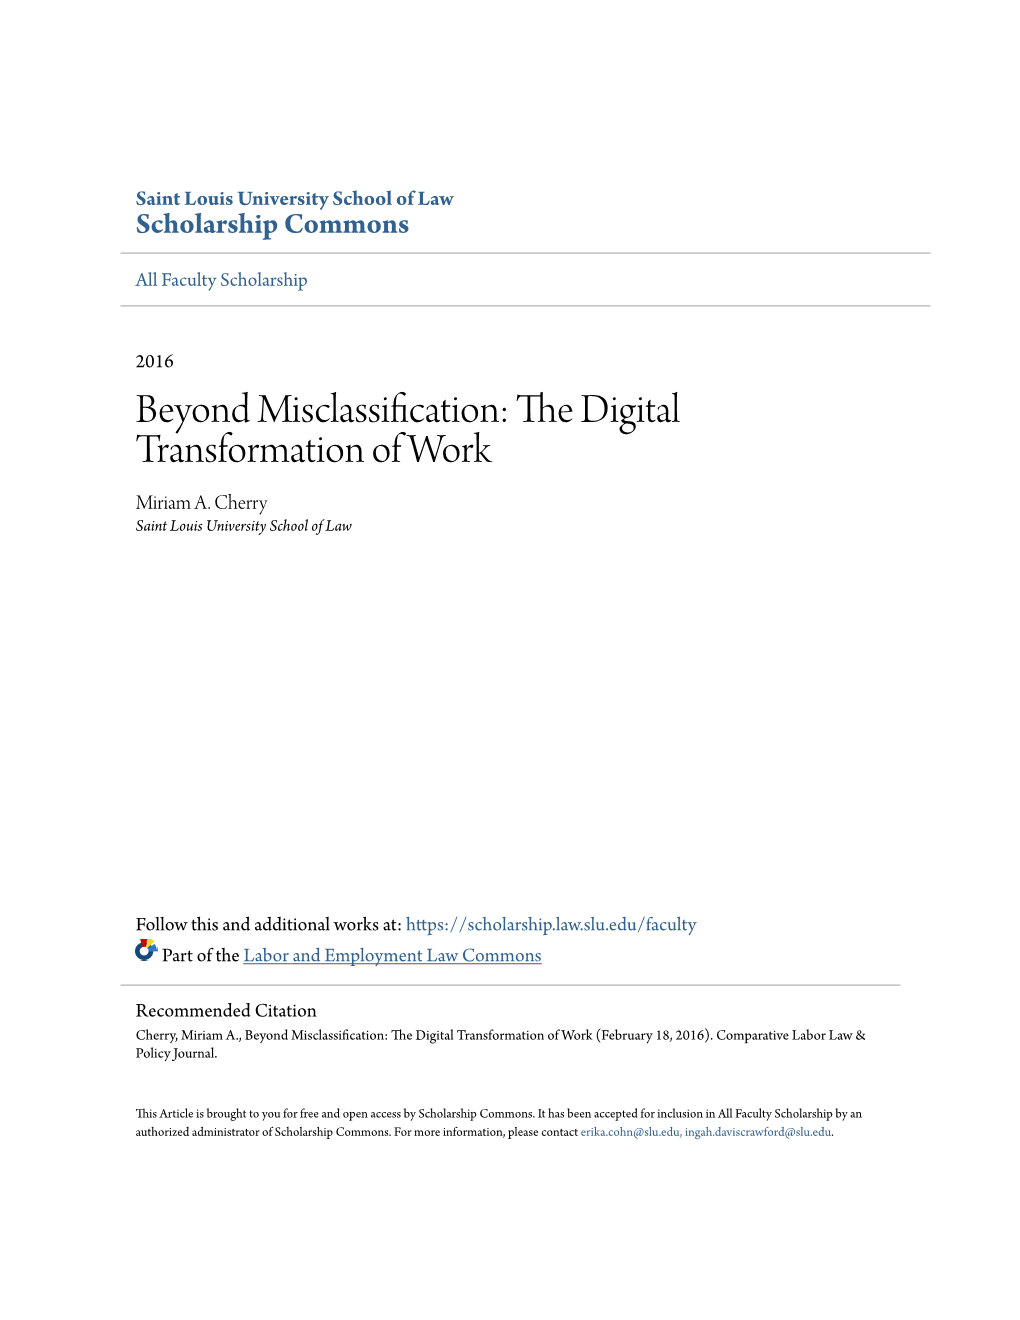 Beyond Misclassification: the Digital Transformation of Work Miriam A